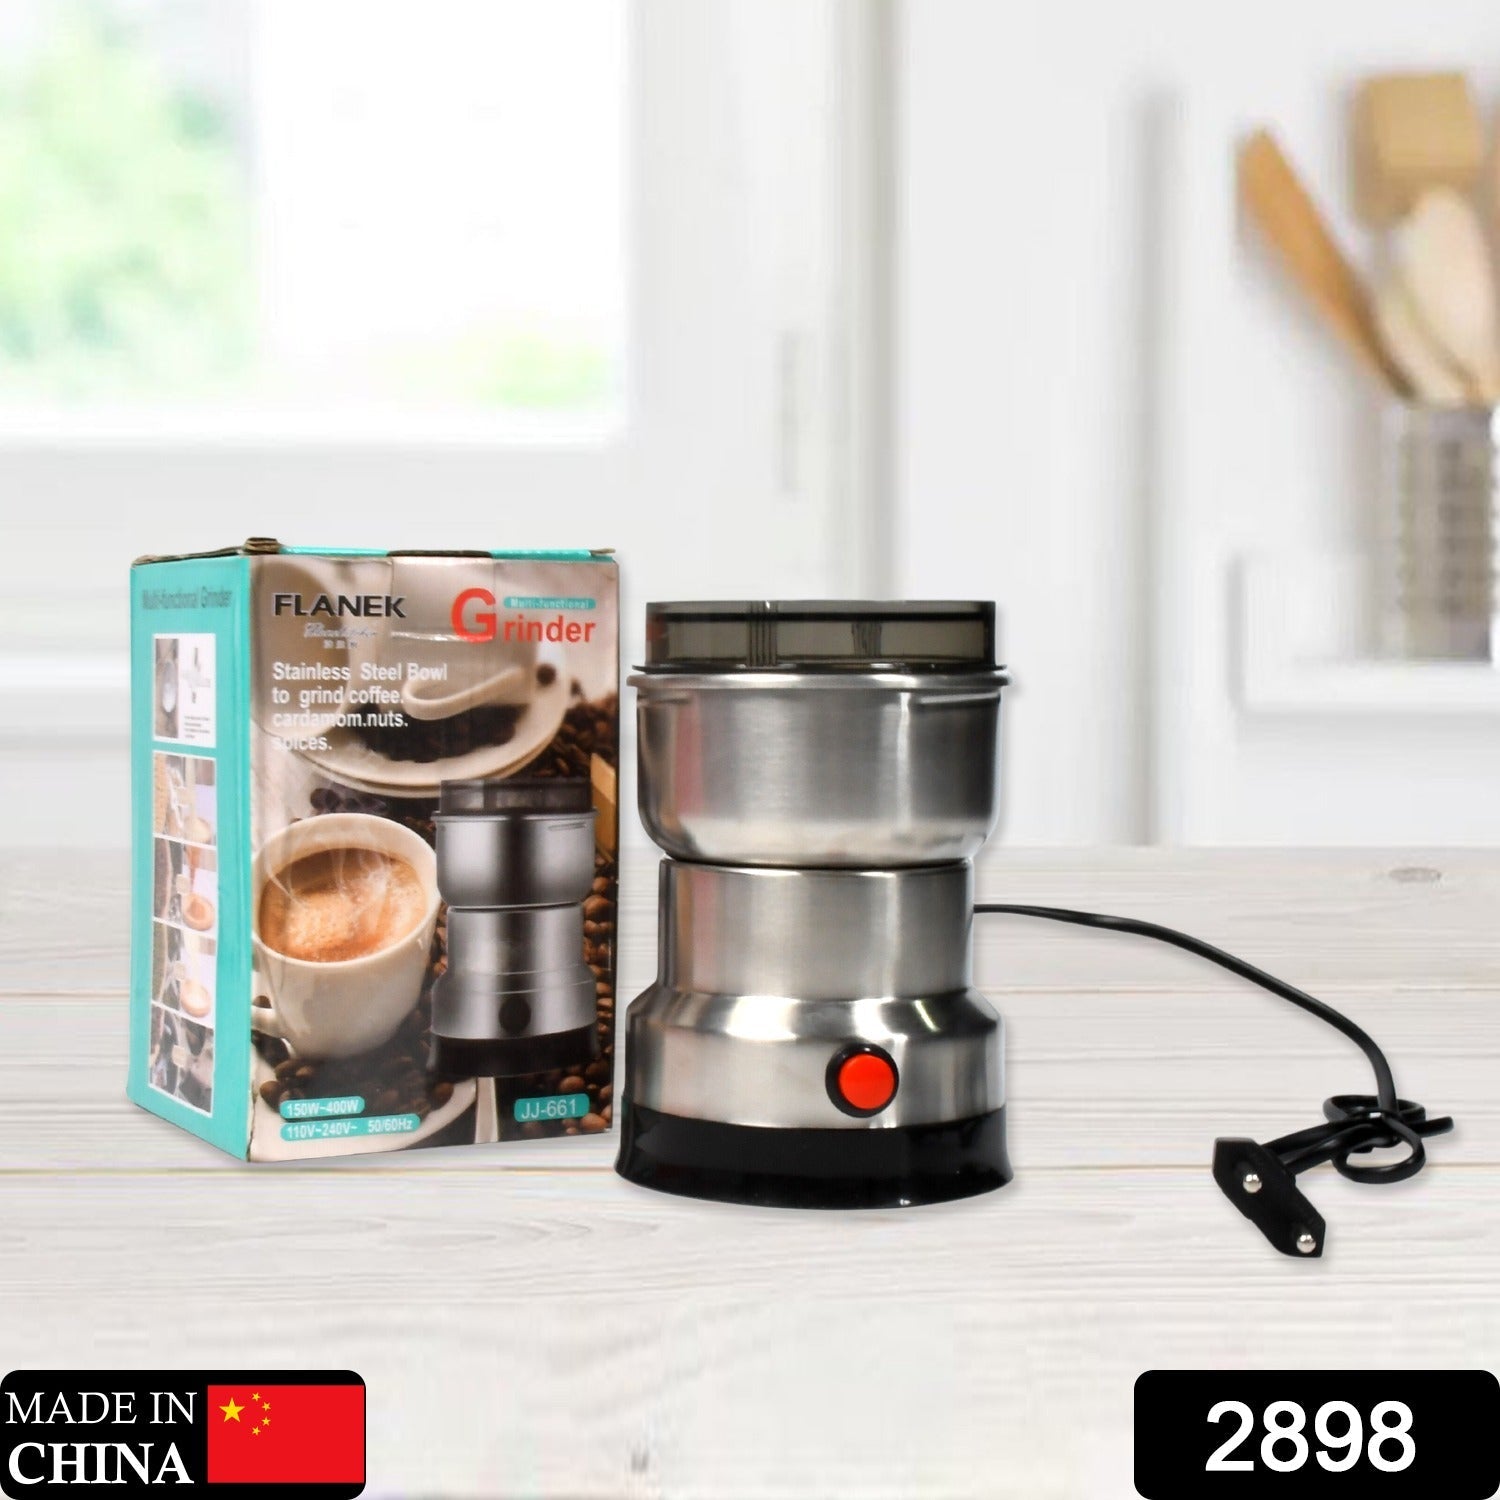 2898 Multifunction Grinder Machine Electric Cereals Grain Mill Spice Herbs Grinding Machine Tool Stainless Steel Electric Coffee Bean for Home DeoDap